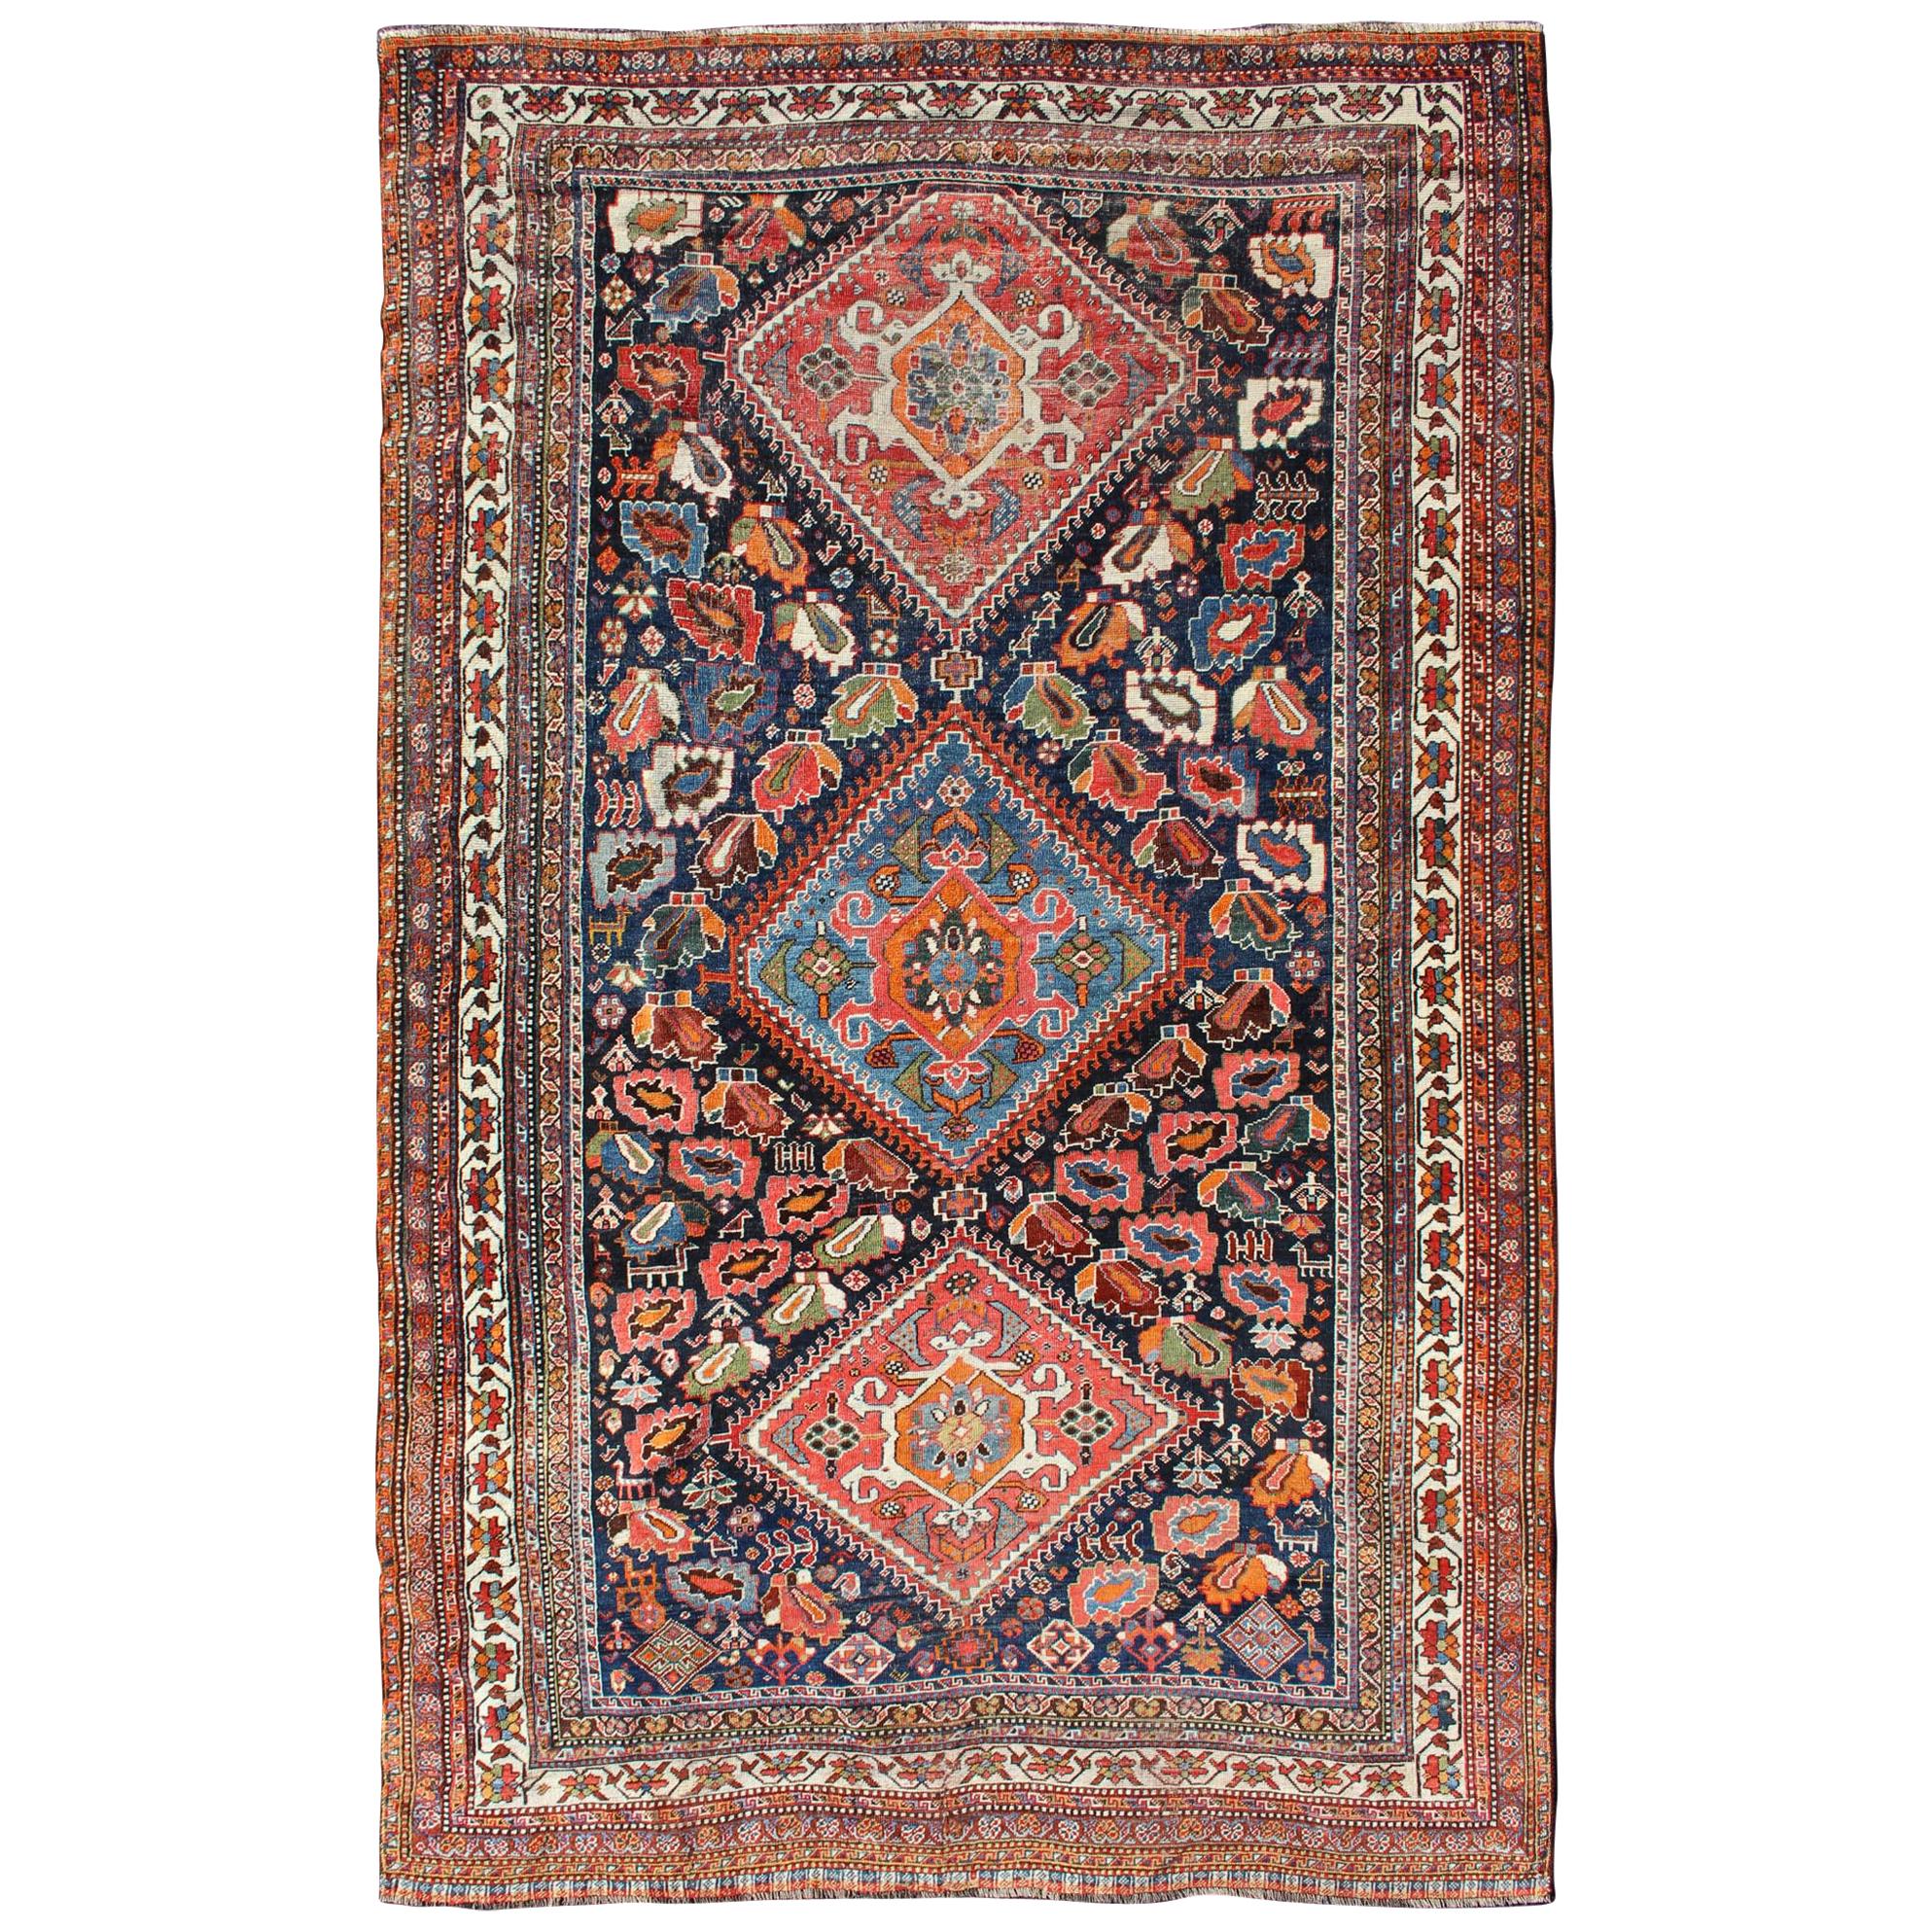 Colorful Tri-Medallion Antique Persian Qashqai Rug with Detailed Tribal Design